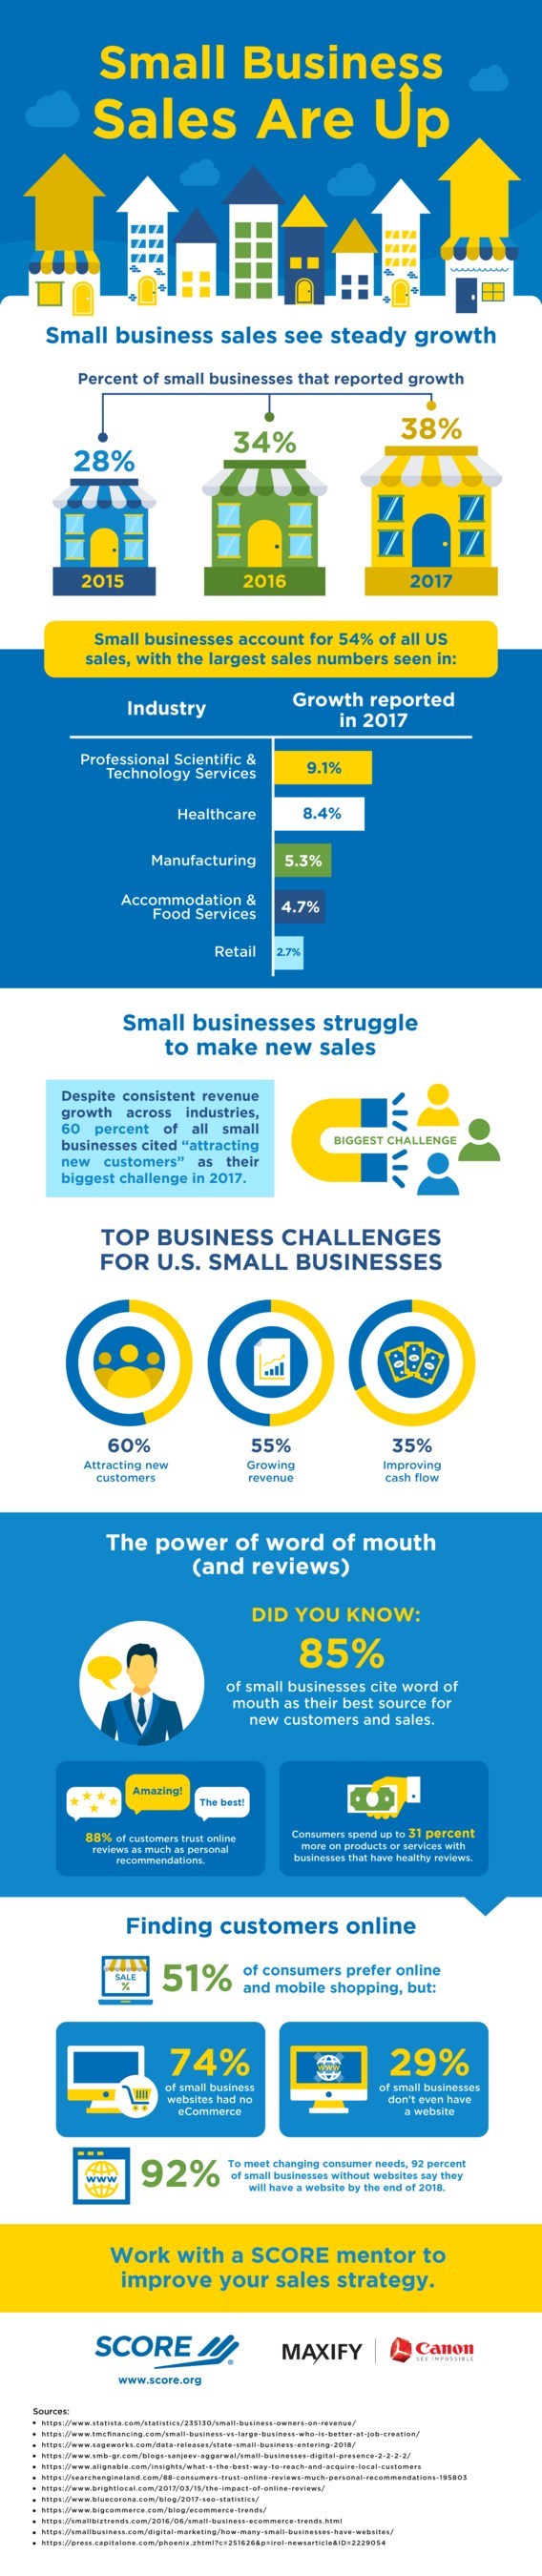 SCORE, the nation’s largest network of volunteer, expert business mentors, has published an infographic showing that small businesses now account for 54% of U.S. sales, with 38% of small businesses reporting growth, and revenue trending upward.